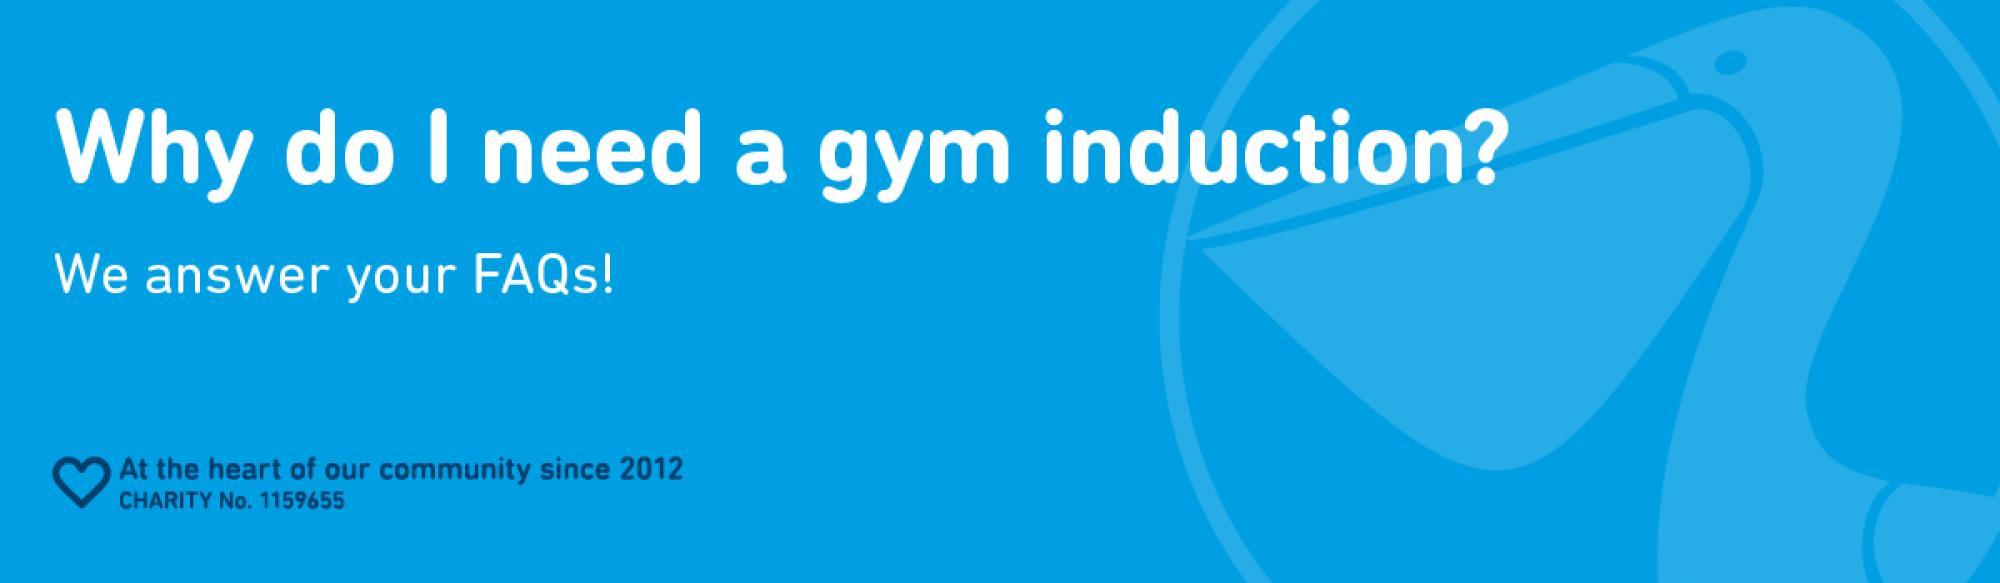 Why do I need a gym induction? Everything you need to know!